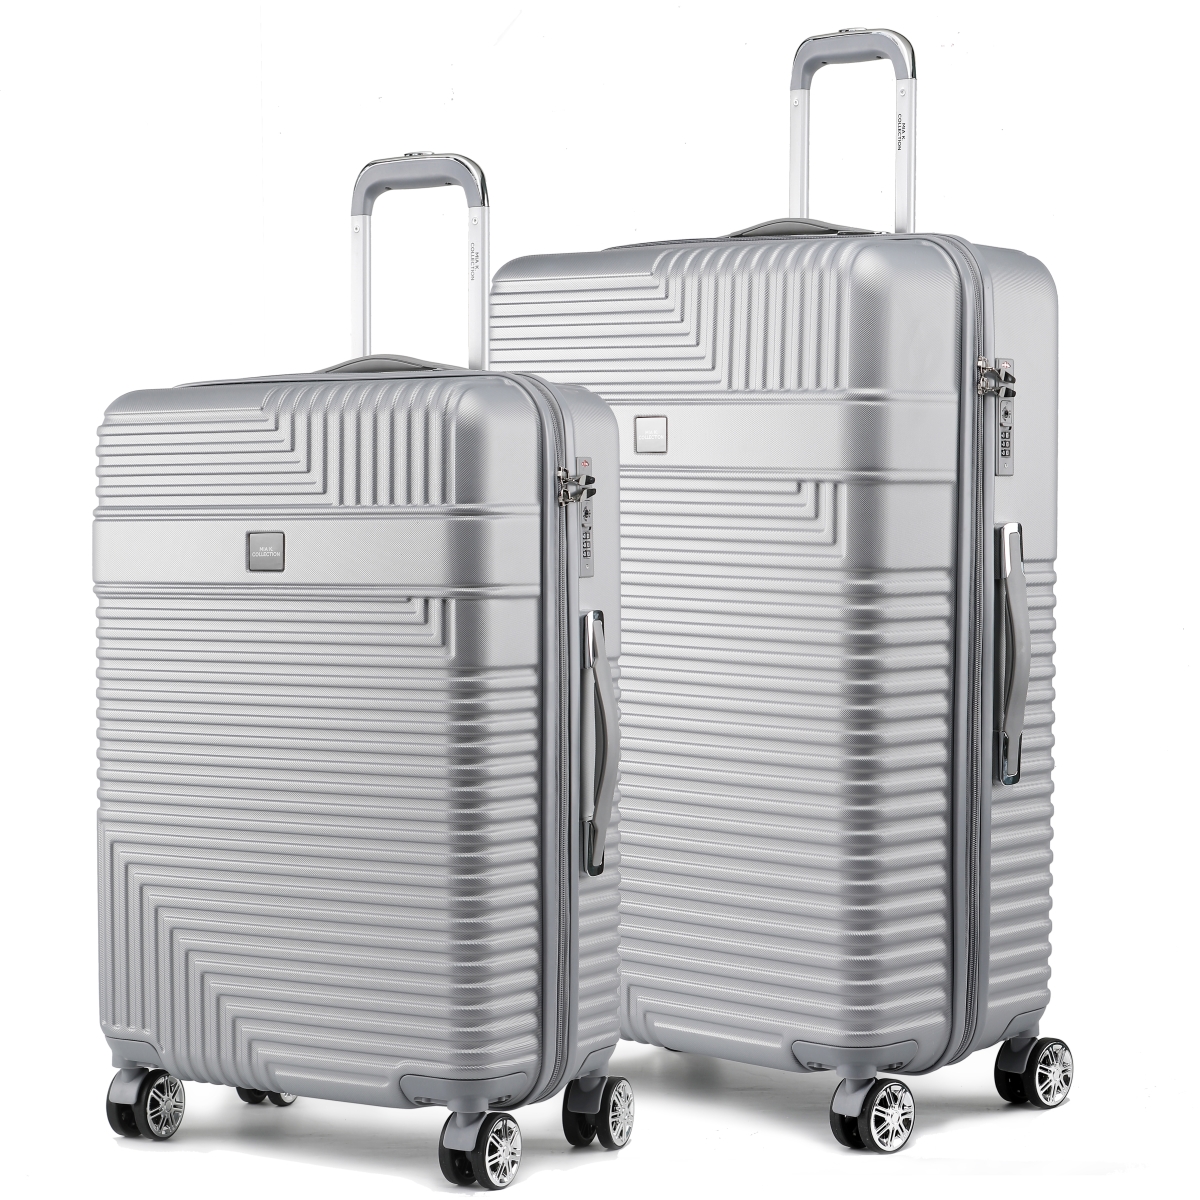 Picture of MKF Collection by Mia K. MKF-F222SL-L-XL Mykonos Luggage Set-Extra Large and Large - 2 pieces